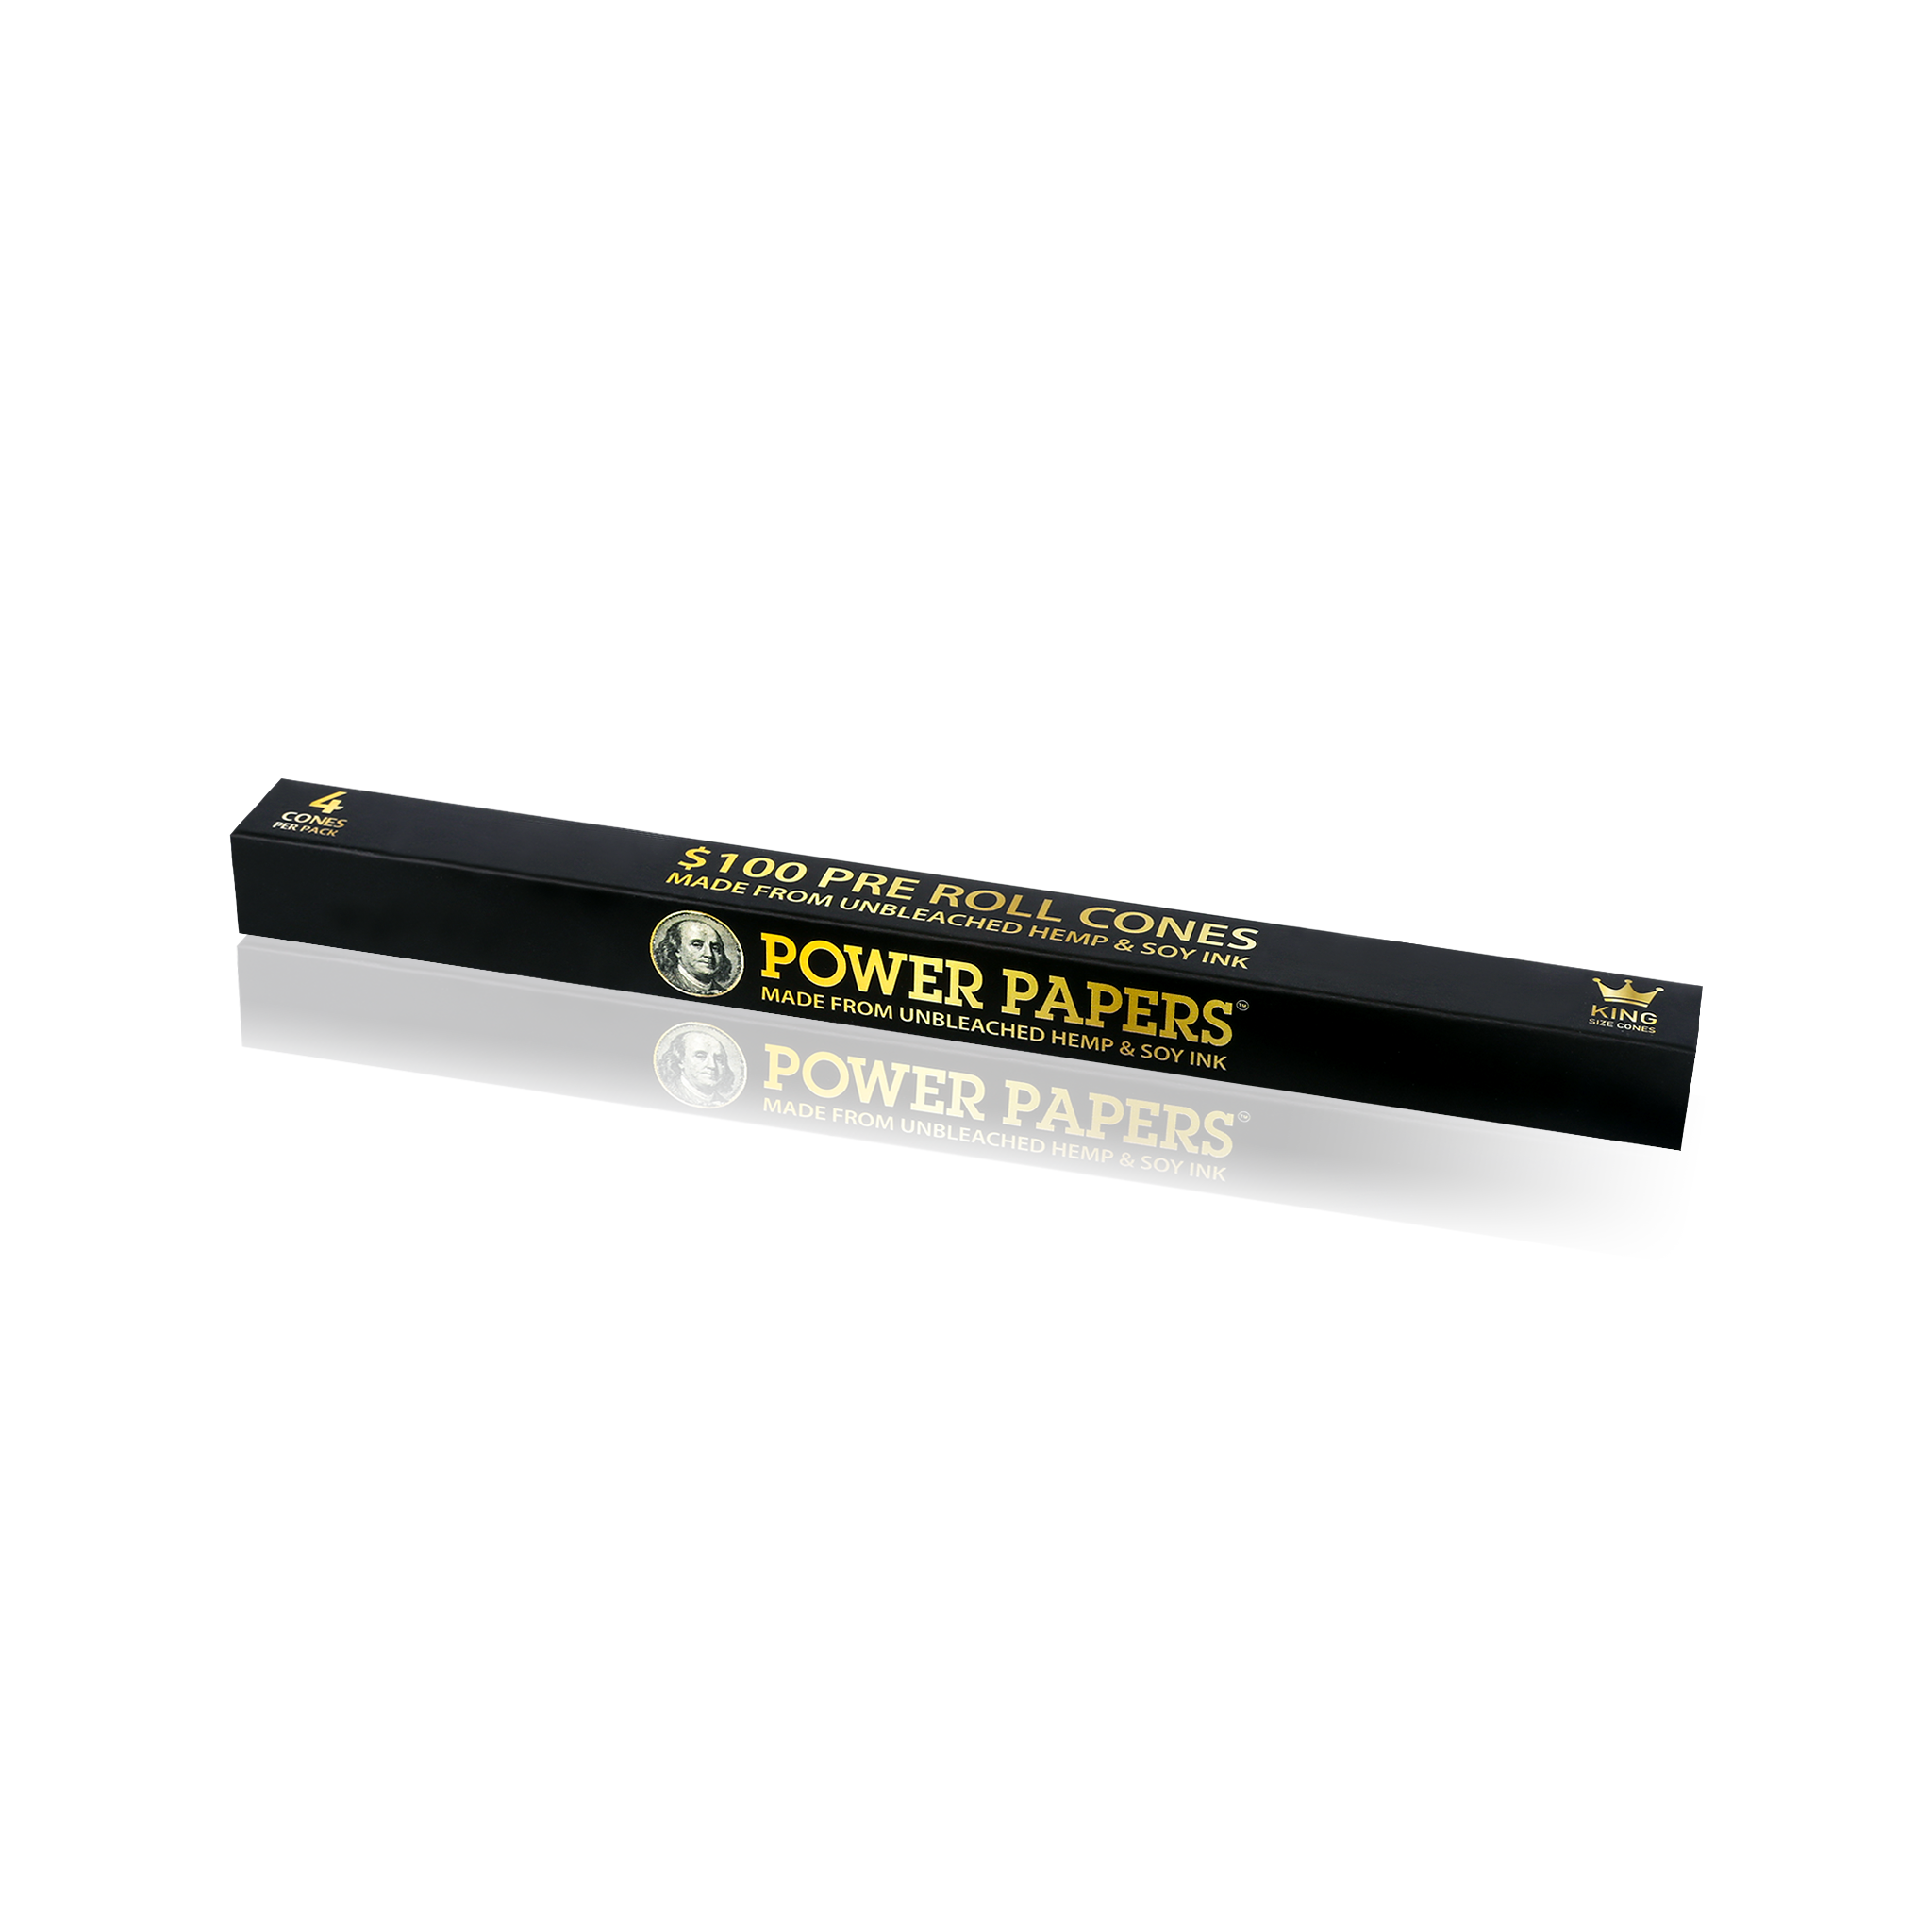 POWER PAPERS™ USD$100 Pre Rolled Cones